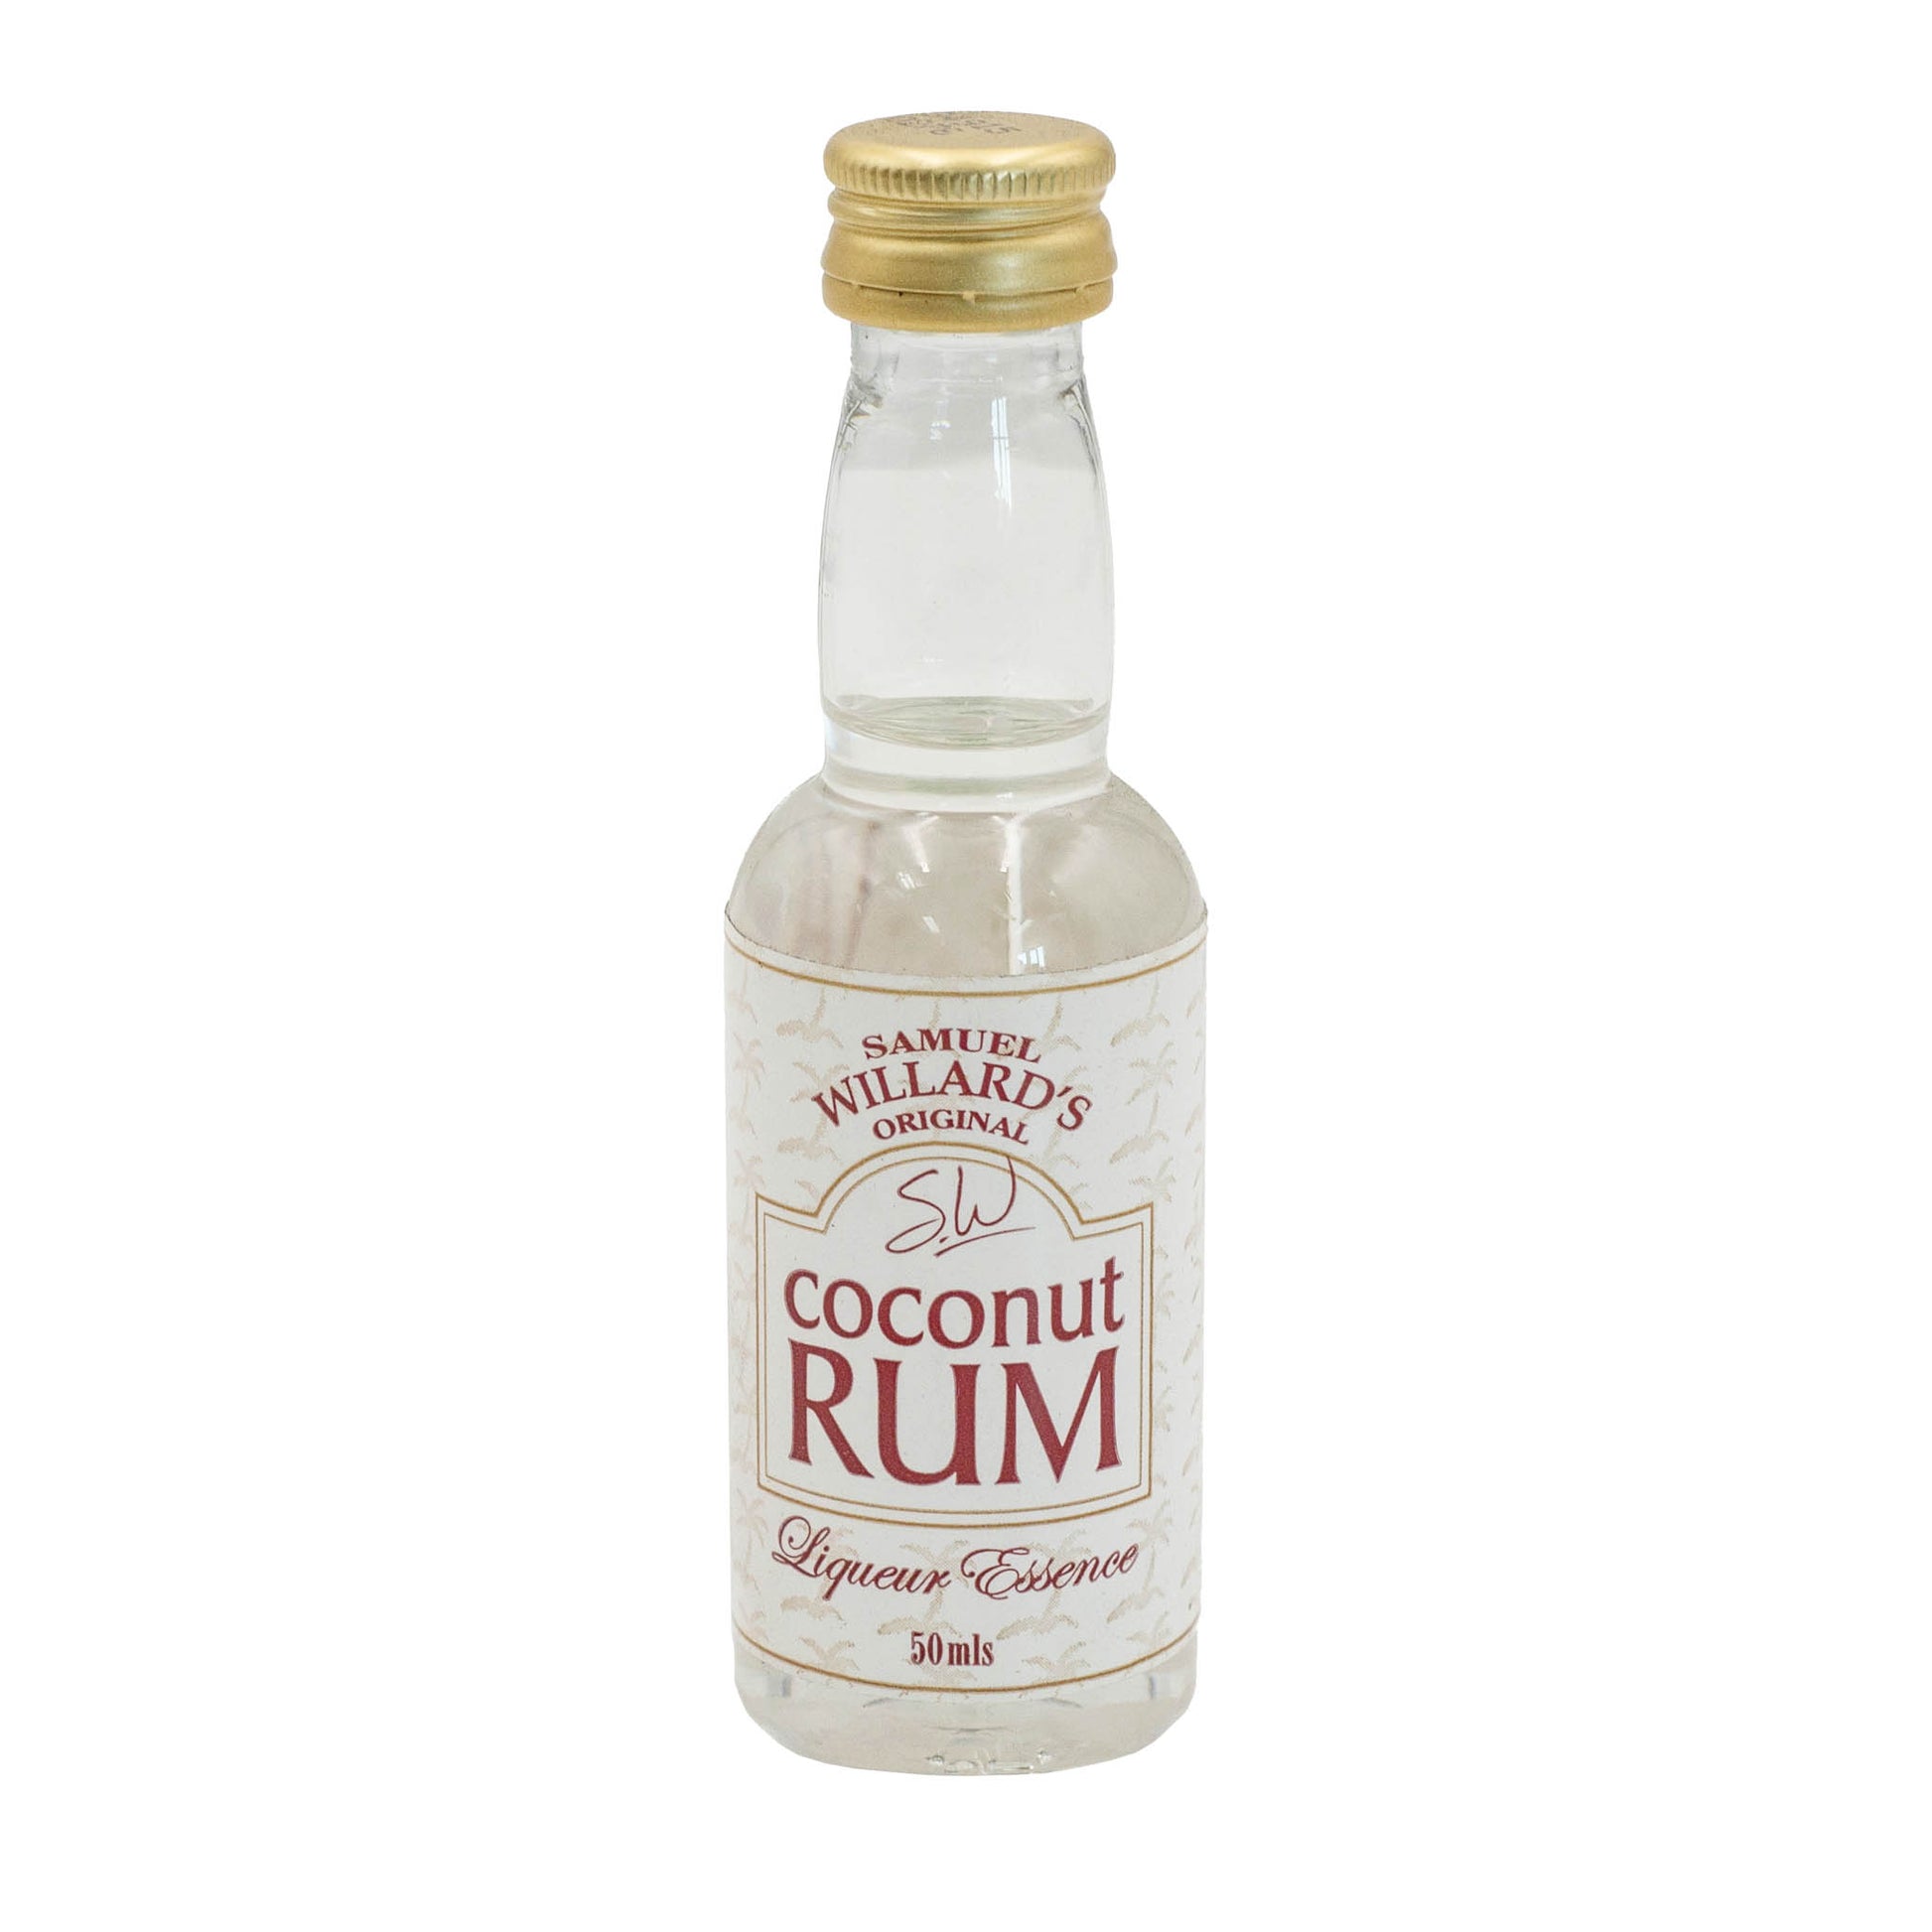 Coconut rum essence 50ml. Makes a Malibu style drink. Will make 1125ml of finished product from each 50ml bottle